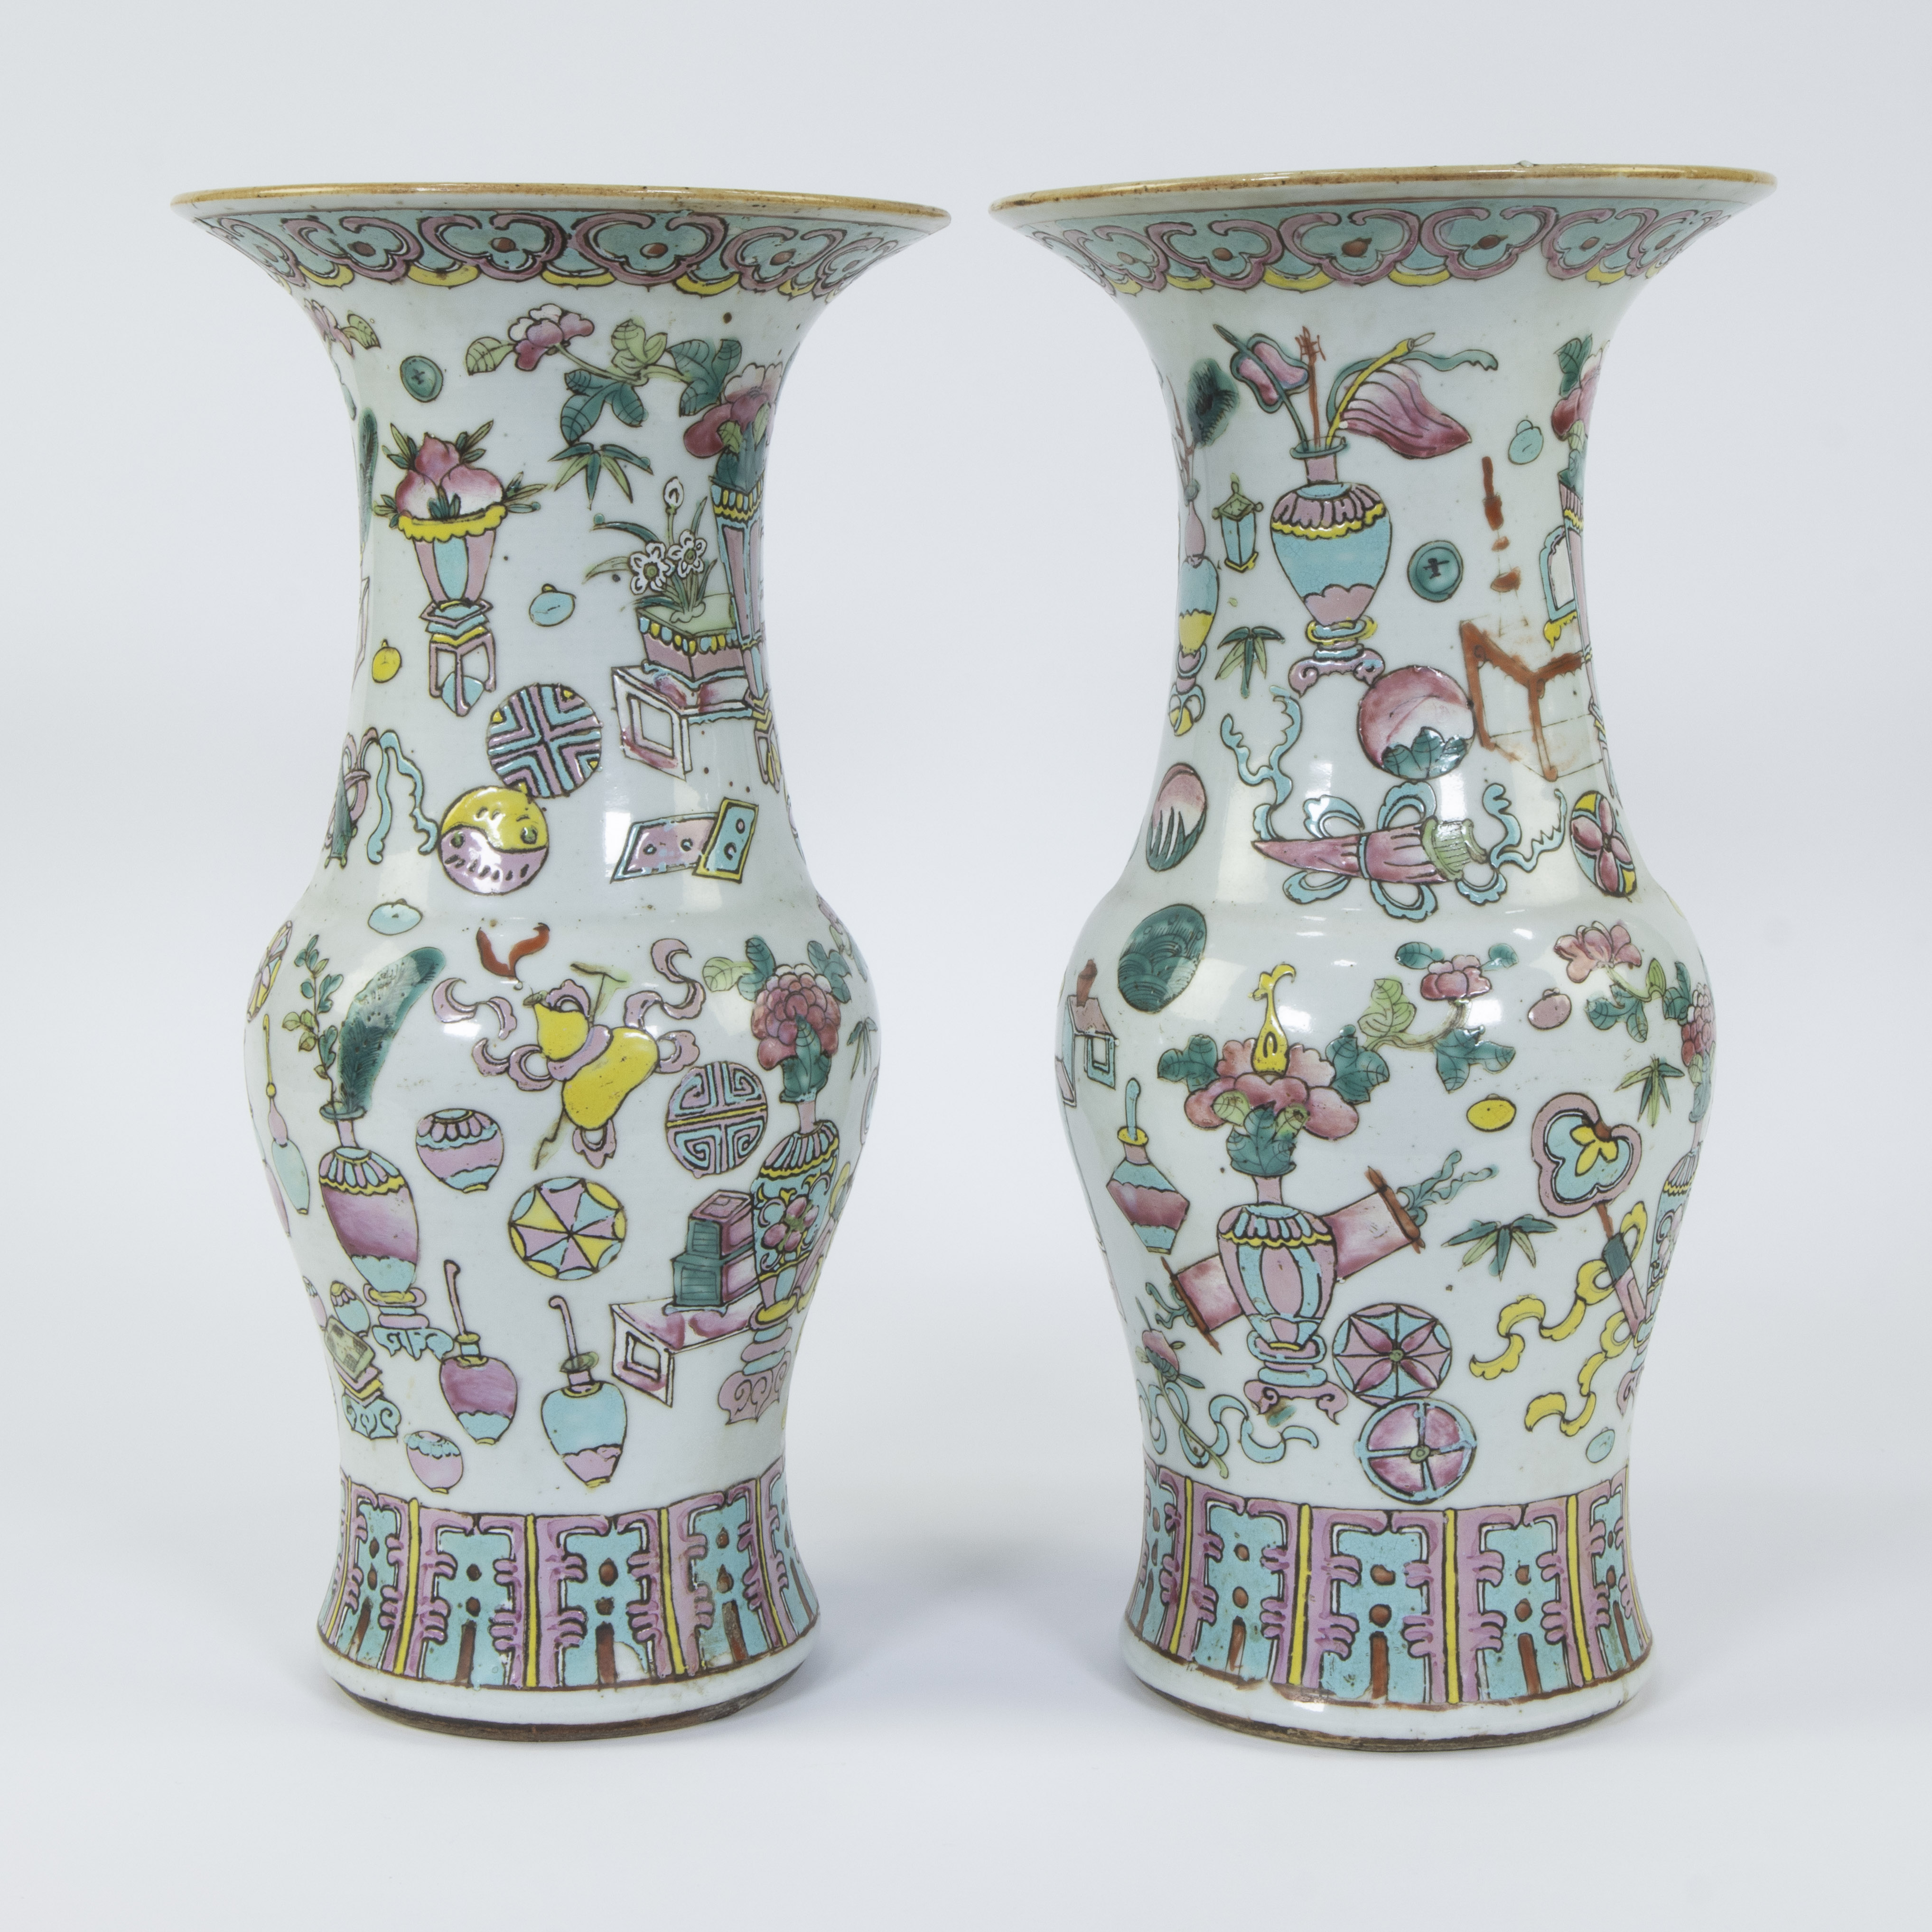 Pair of Chinese famille rose Yenyen vases with decoration of valuables, 19th century - Image 4 of 6